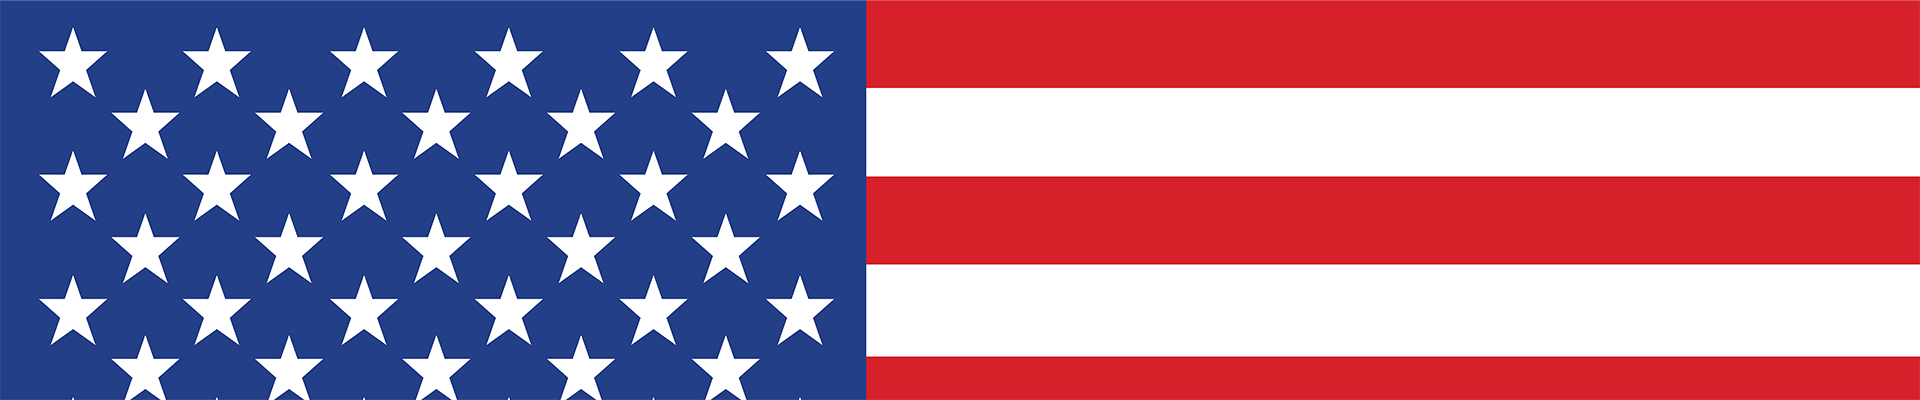 The upper third of the US flag